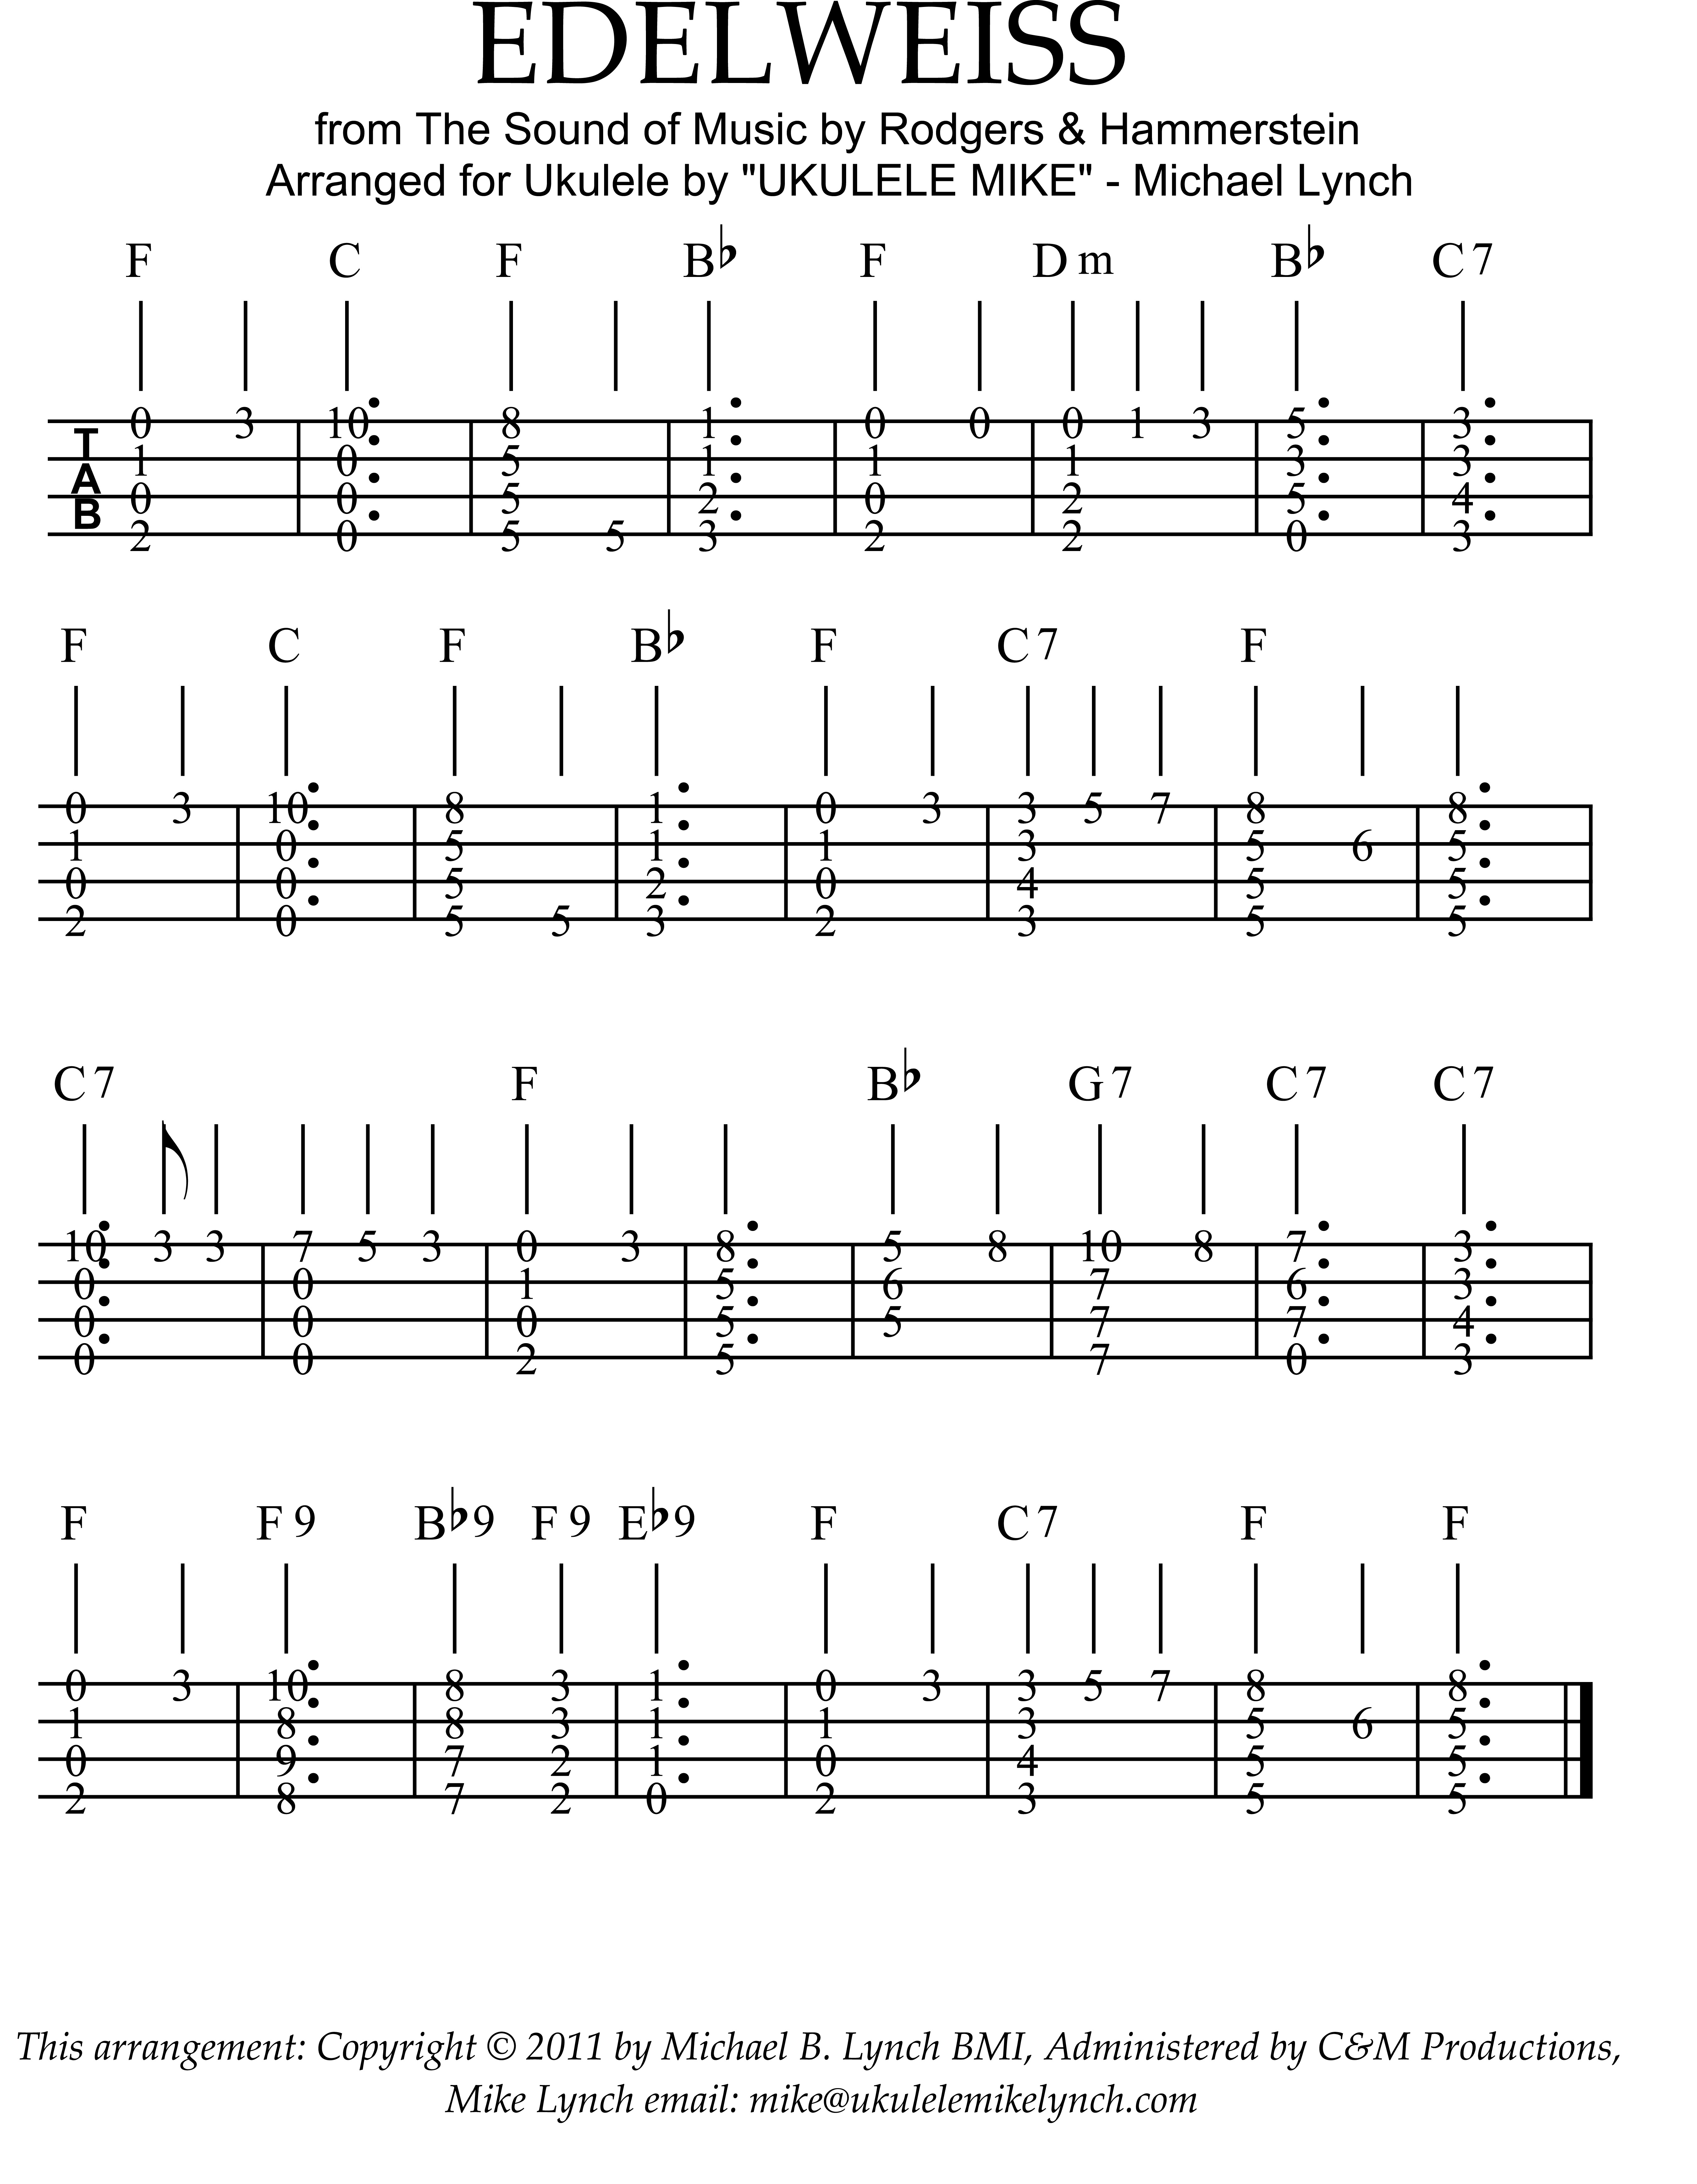 Finale 2008 Edelweiss Chord  Melody Arrangement for 